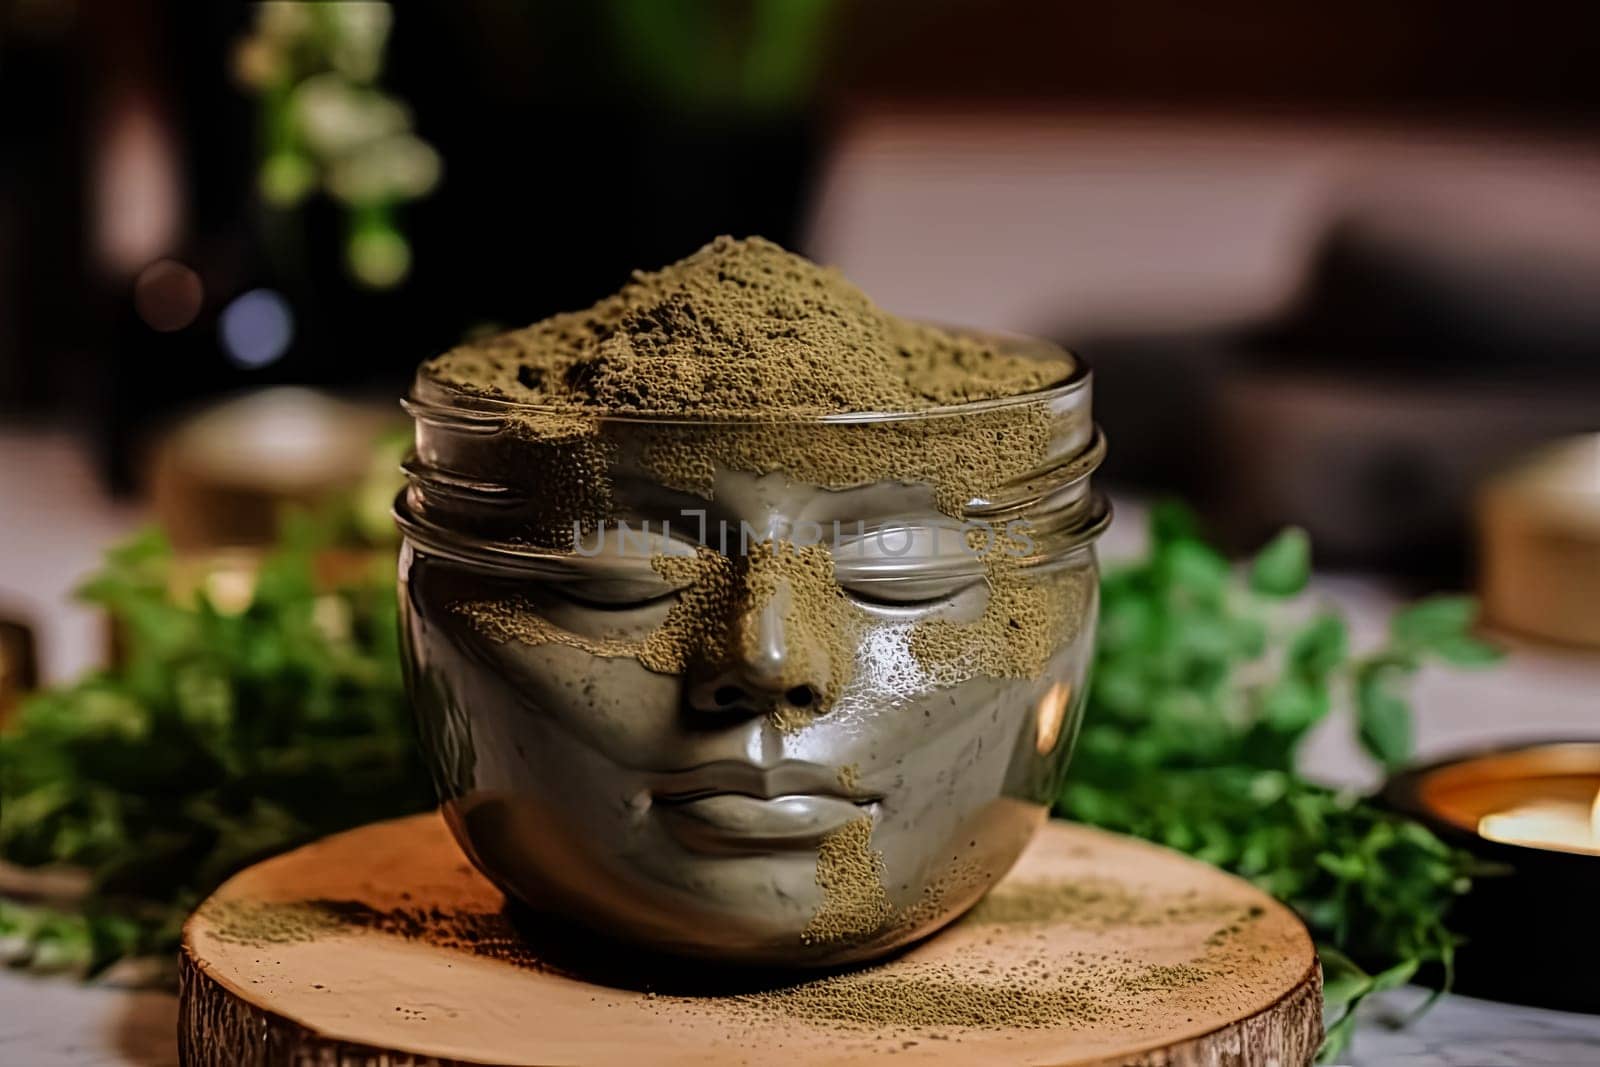 A jar of green facial clay sits on the table next to a bowl and spoon. The jar is filled with a caring face mask